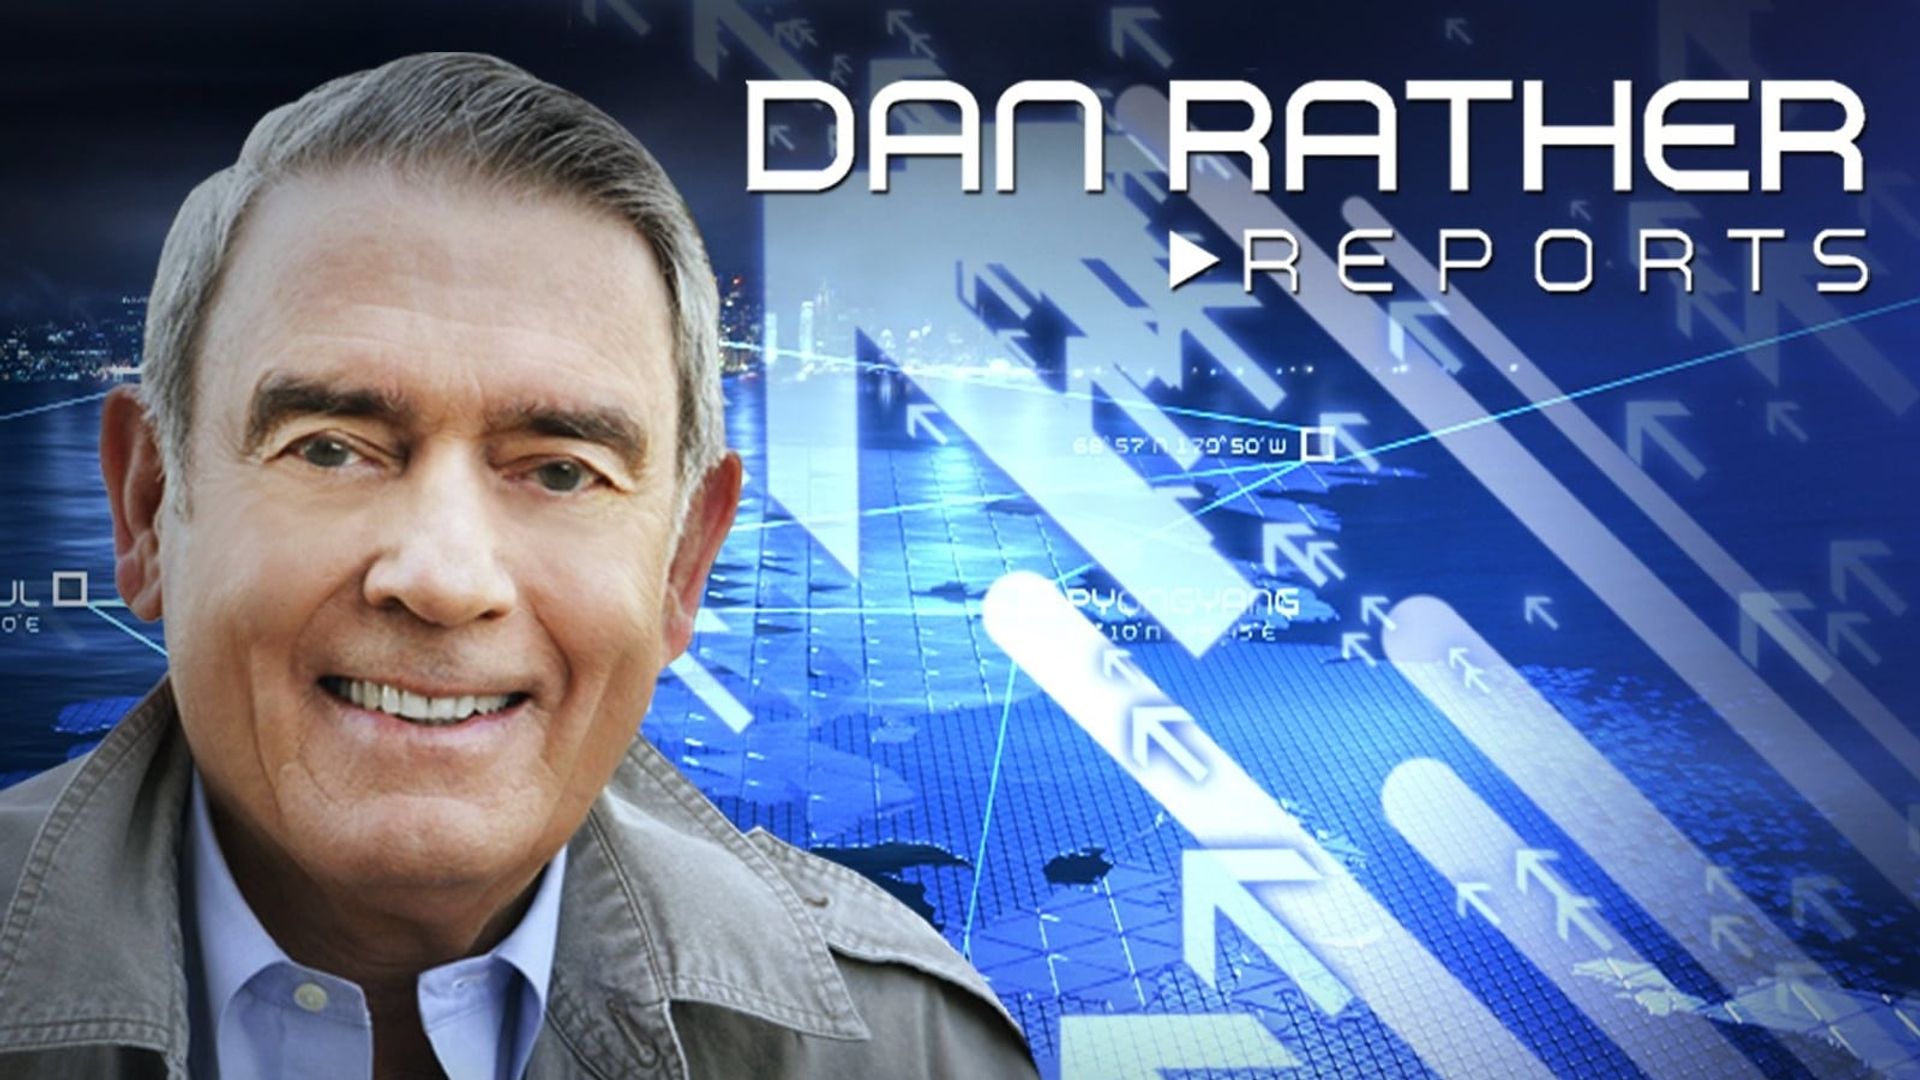 Dan Rather Reports background